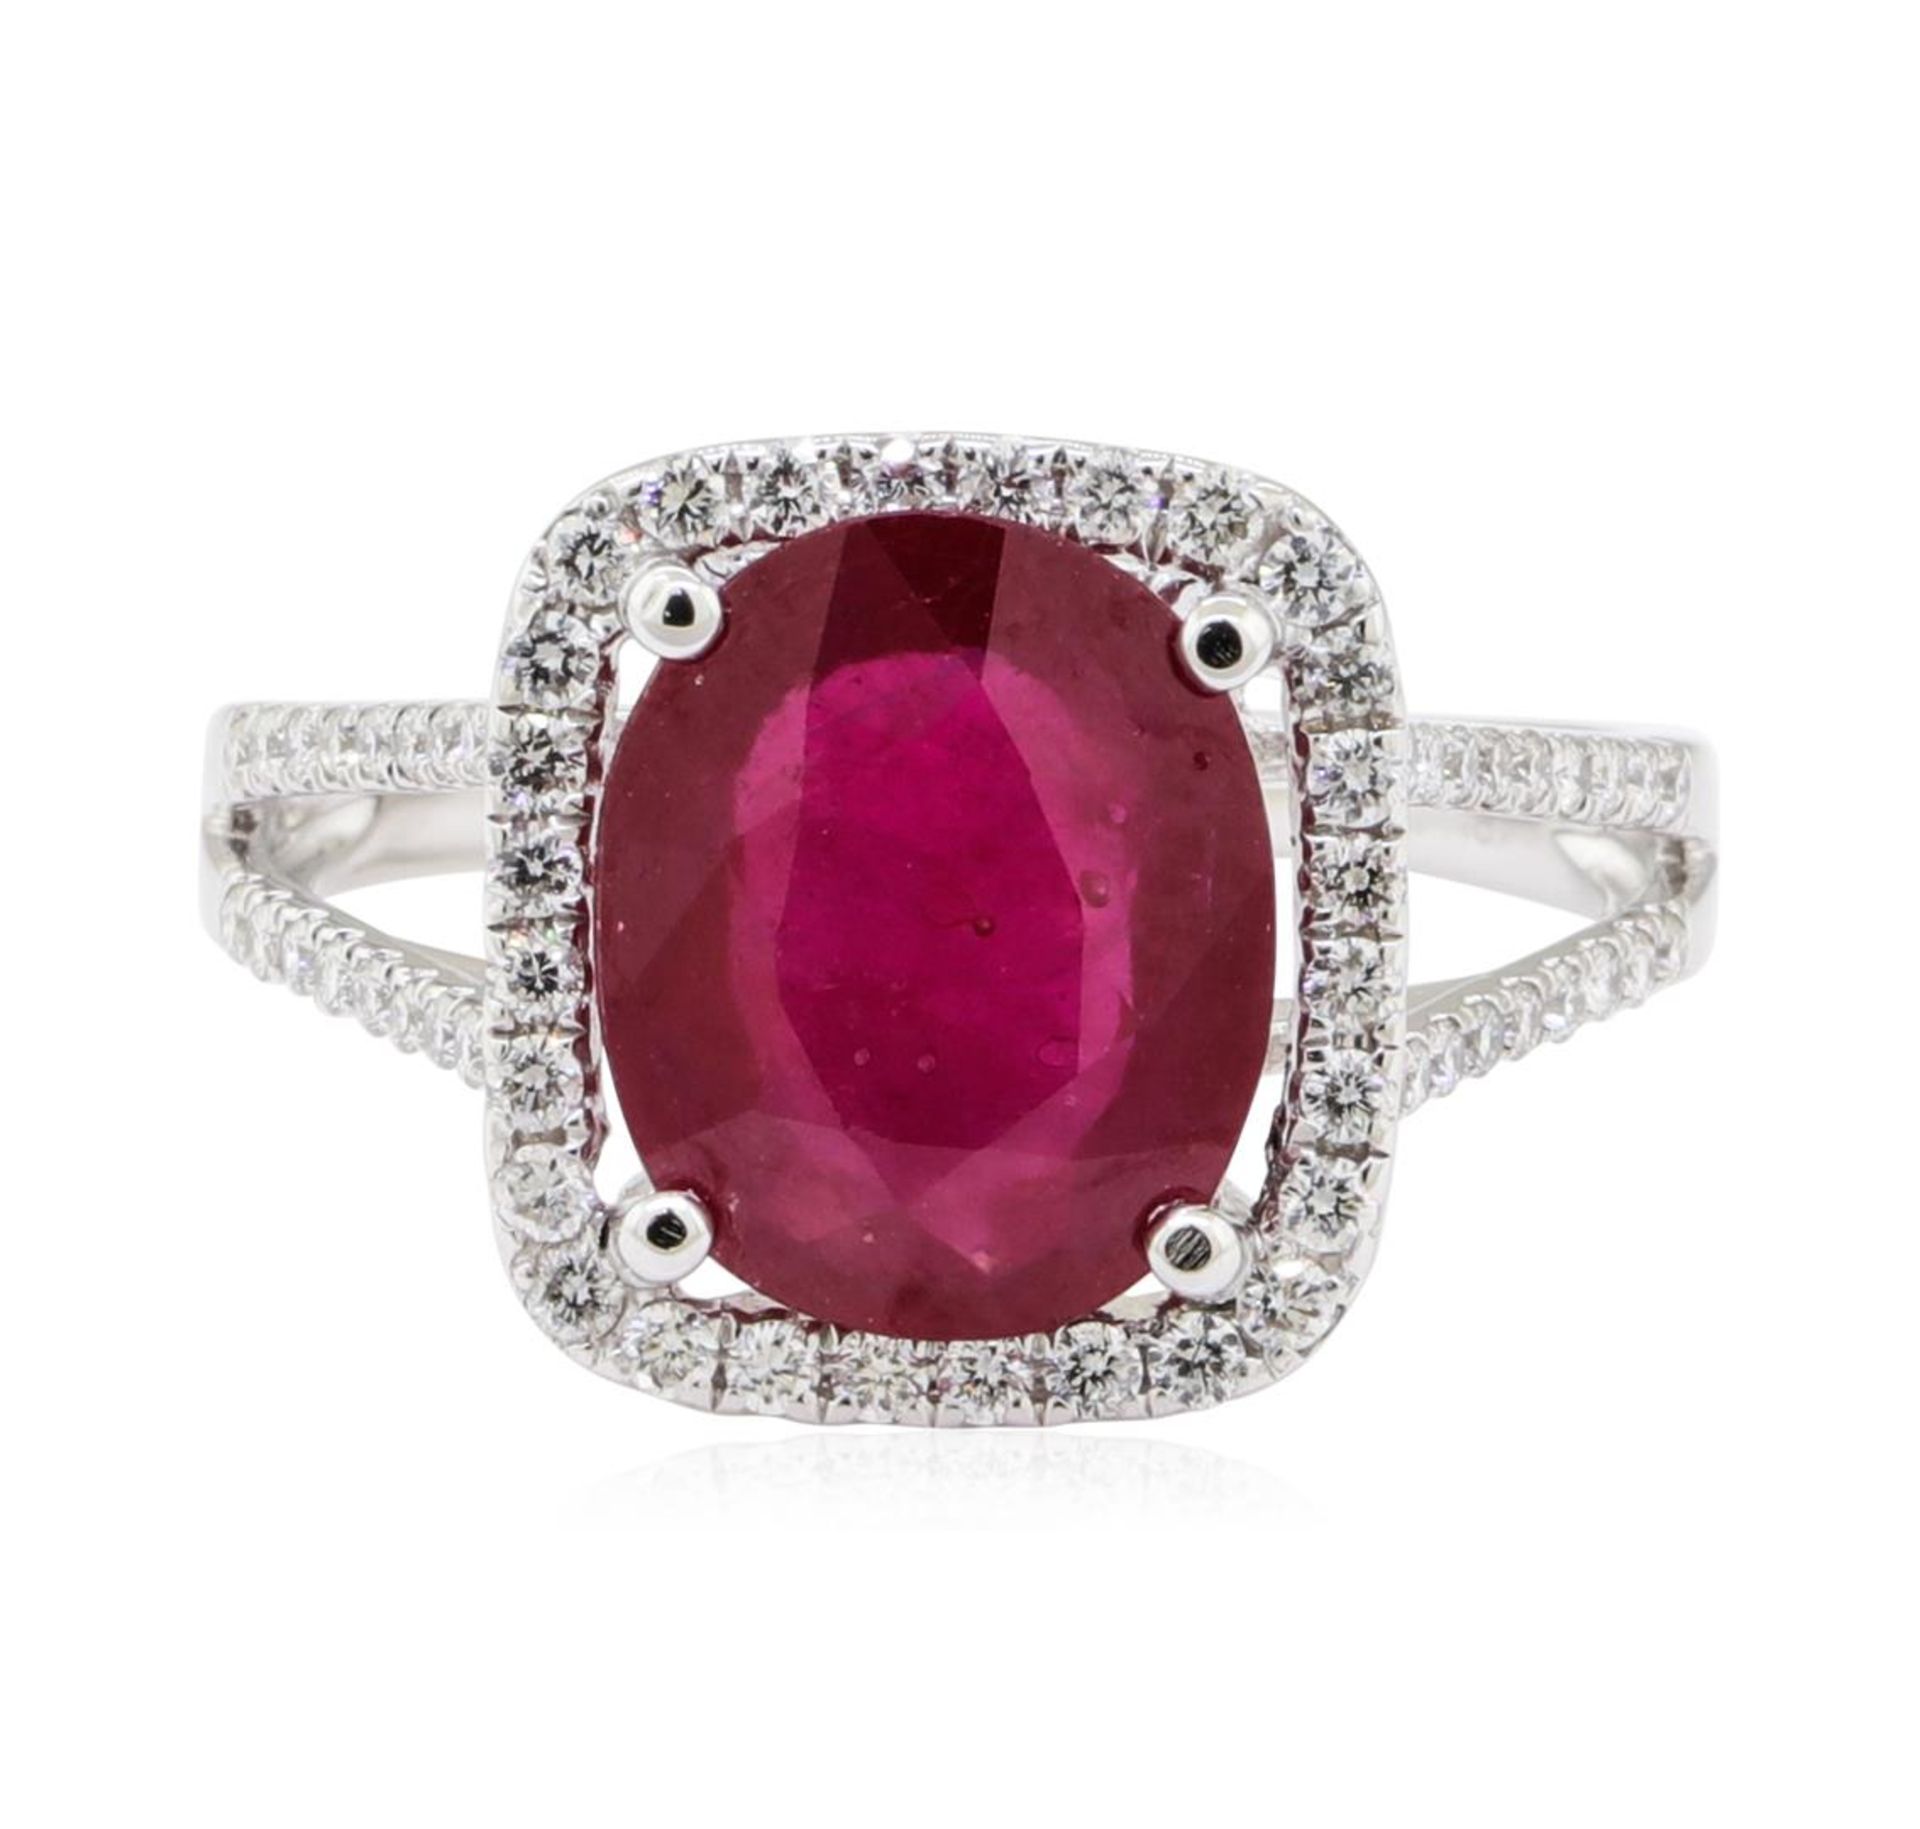 4.40 ctw Ruby and Diamond Ring - 18KT White Gold - Image 2 of 5